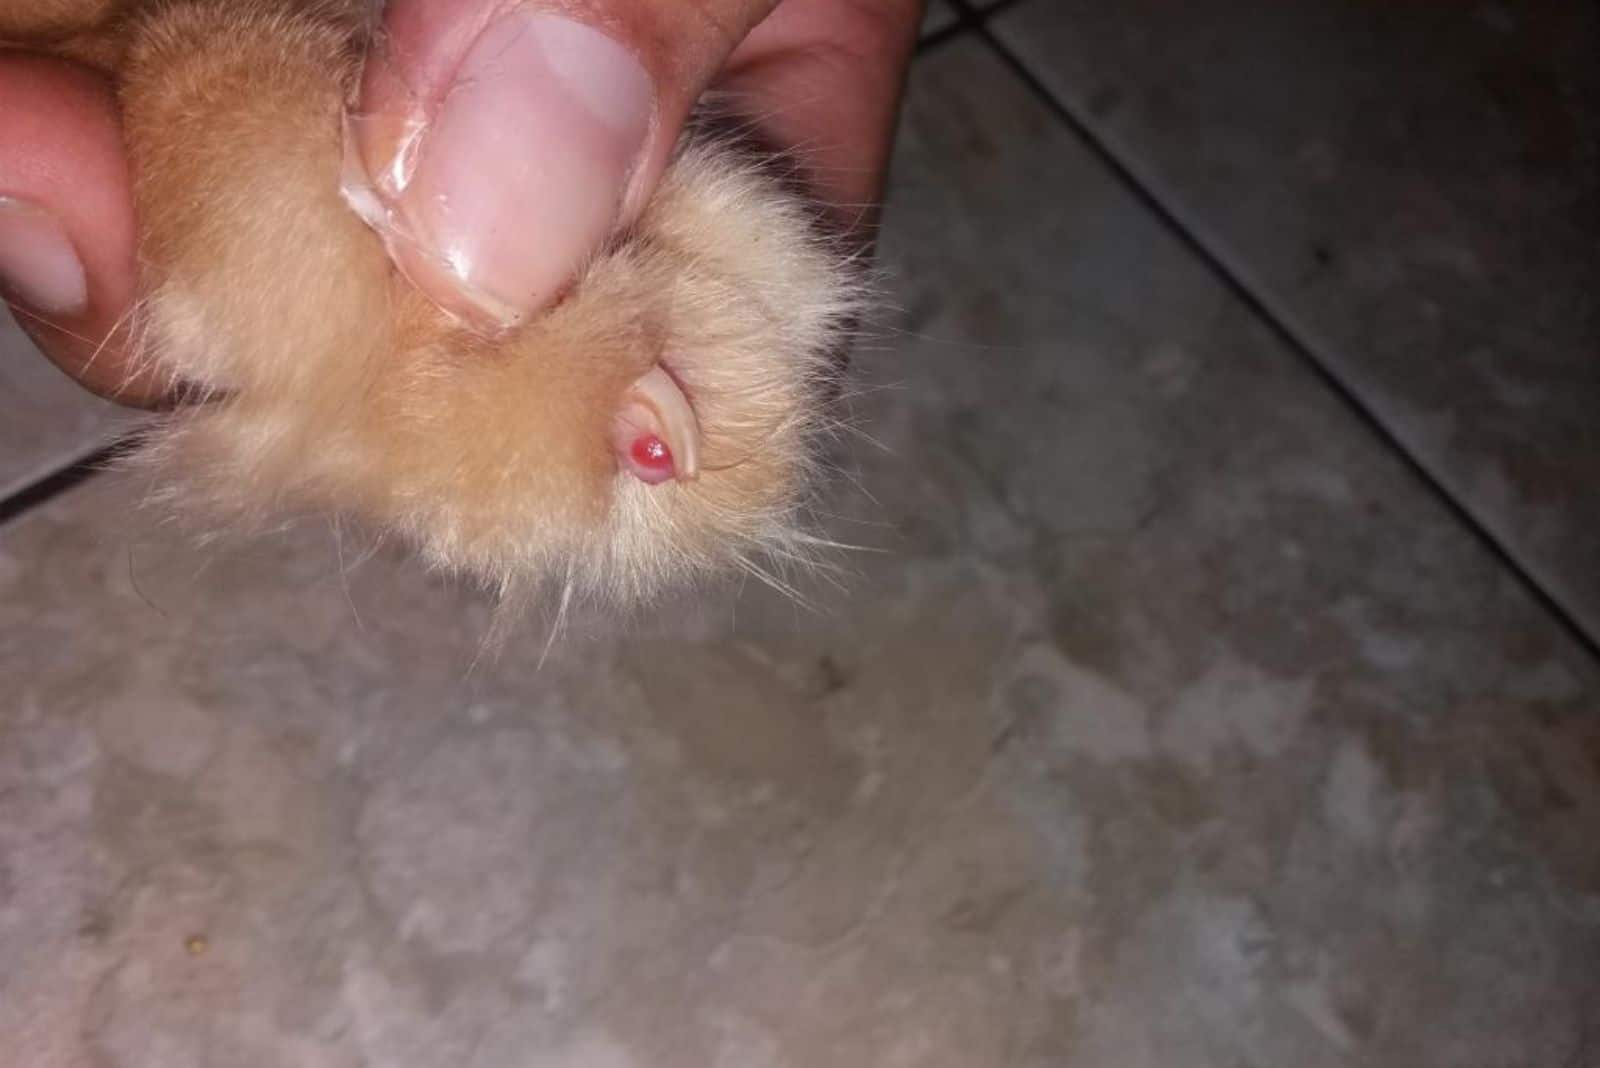 a cyst on a cat's nail